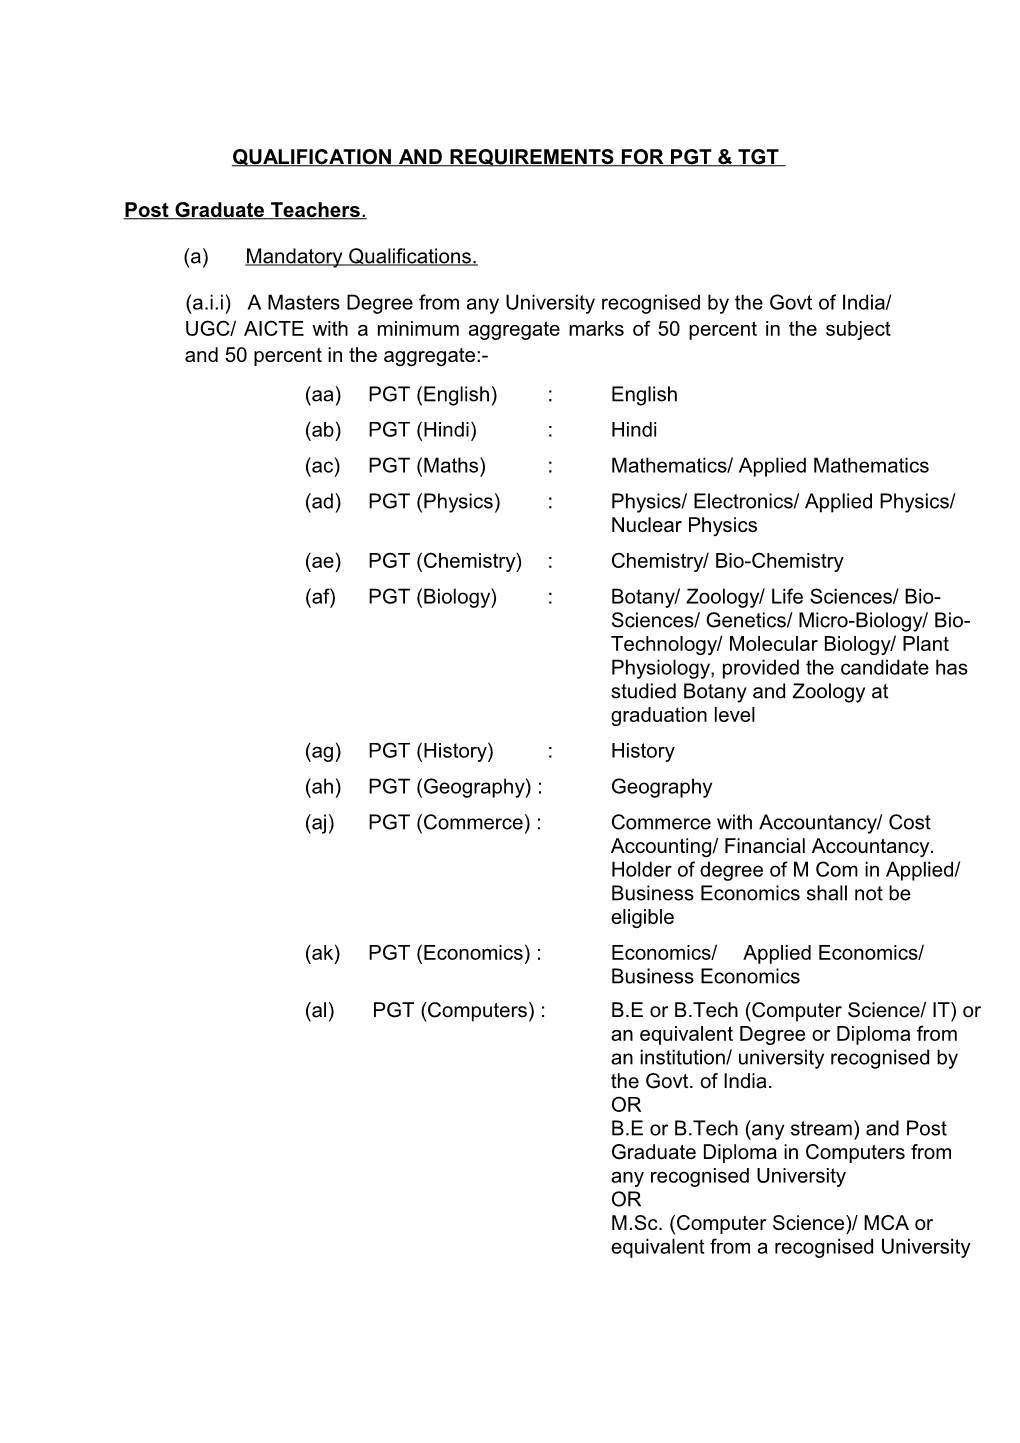 Qualification and Requirements for Pgt & Tgt